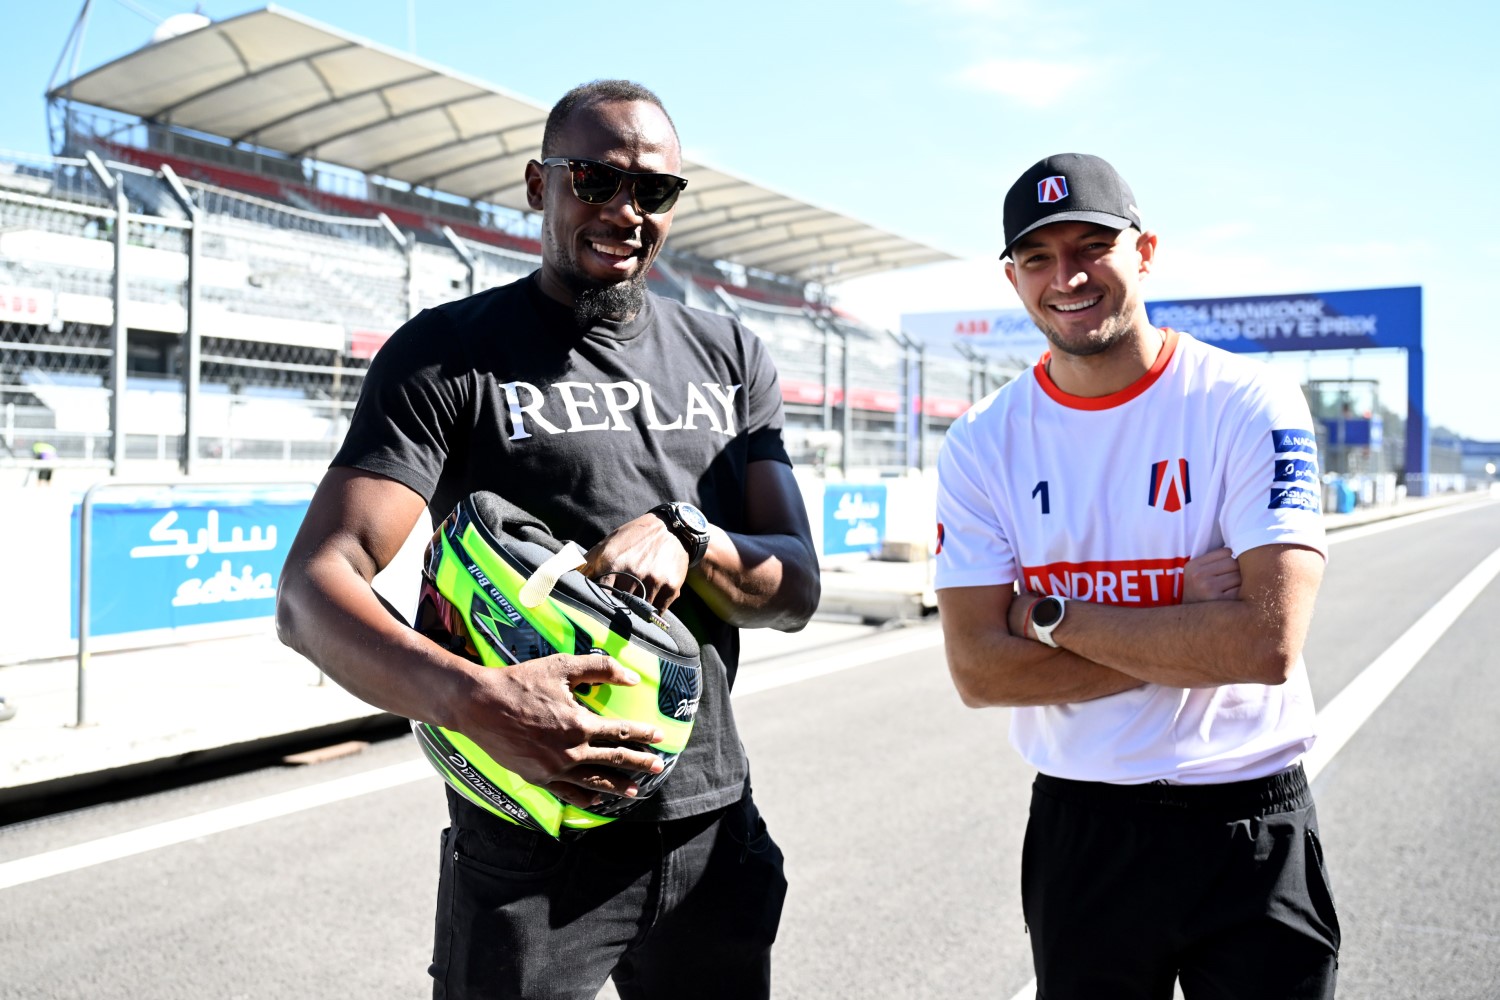 Usain Bolt meets Jake Dennis, Andretti Global and has been given a helmet